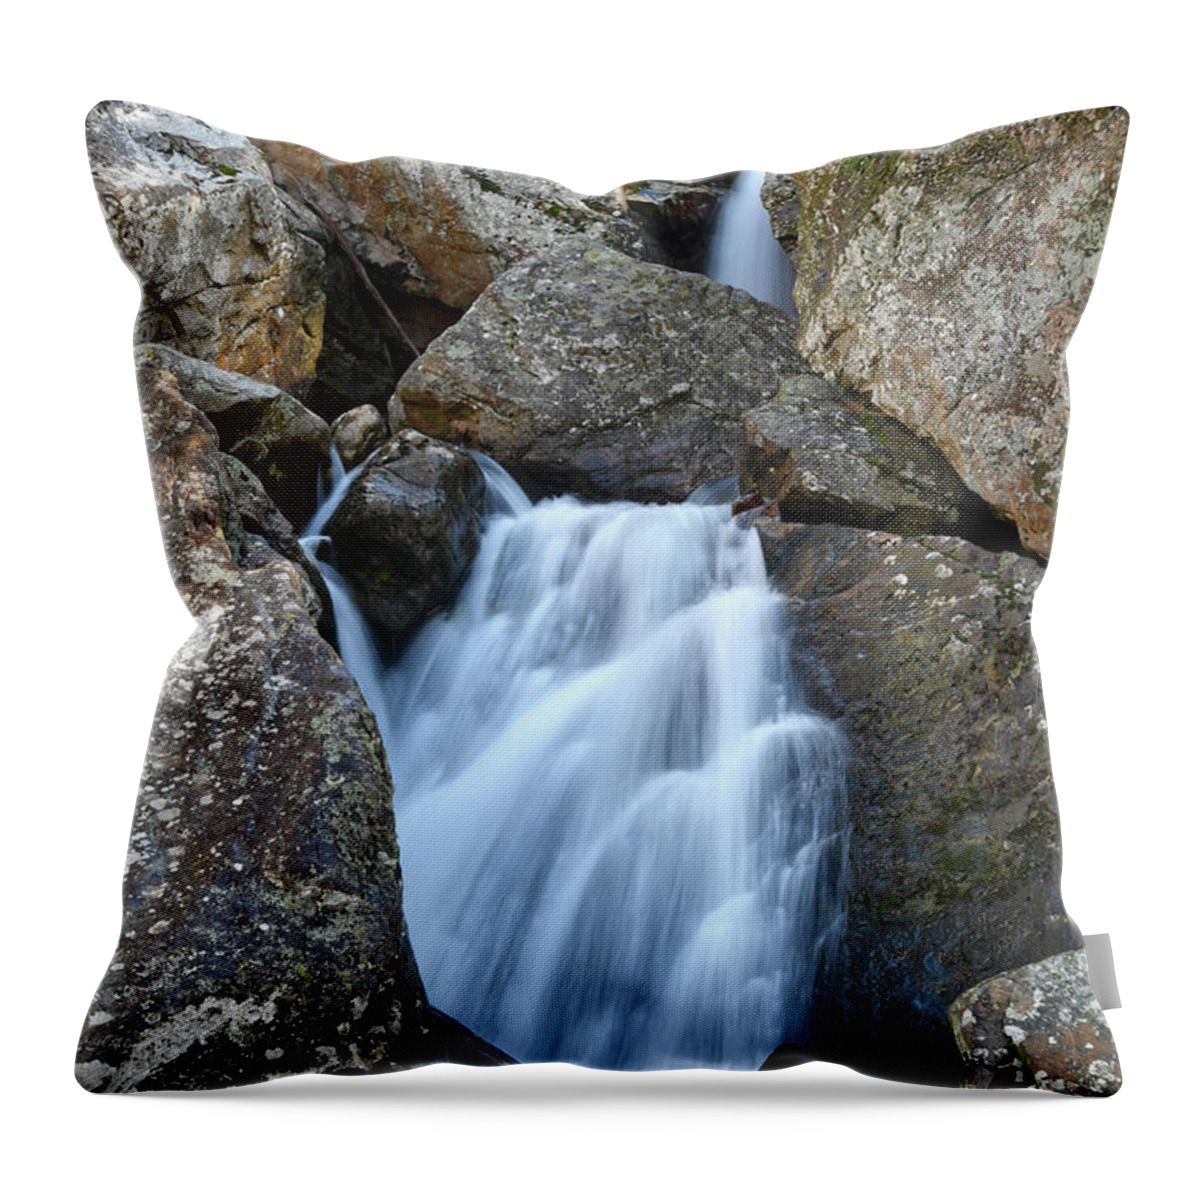 Paine Creek Throw Pillow featuring the photograph Paine Creek 27 by Phil Perkins